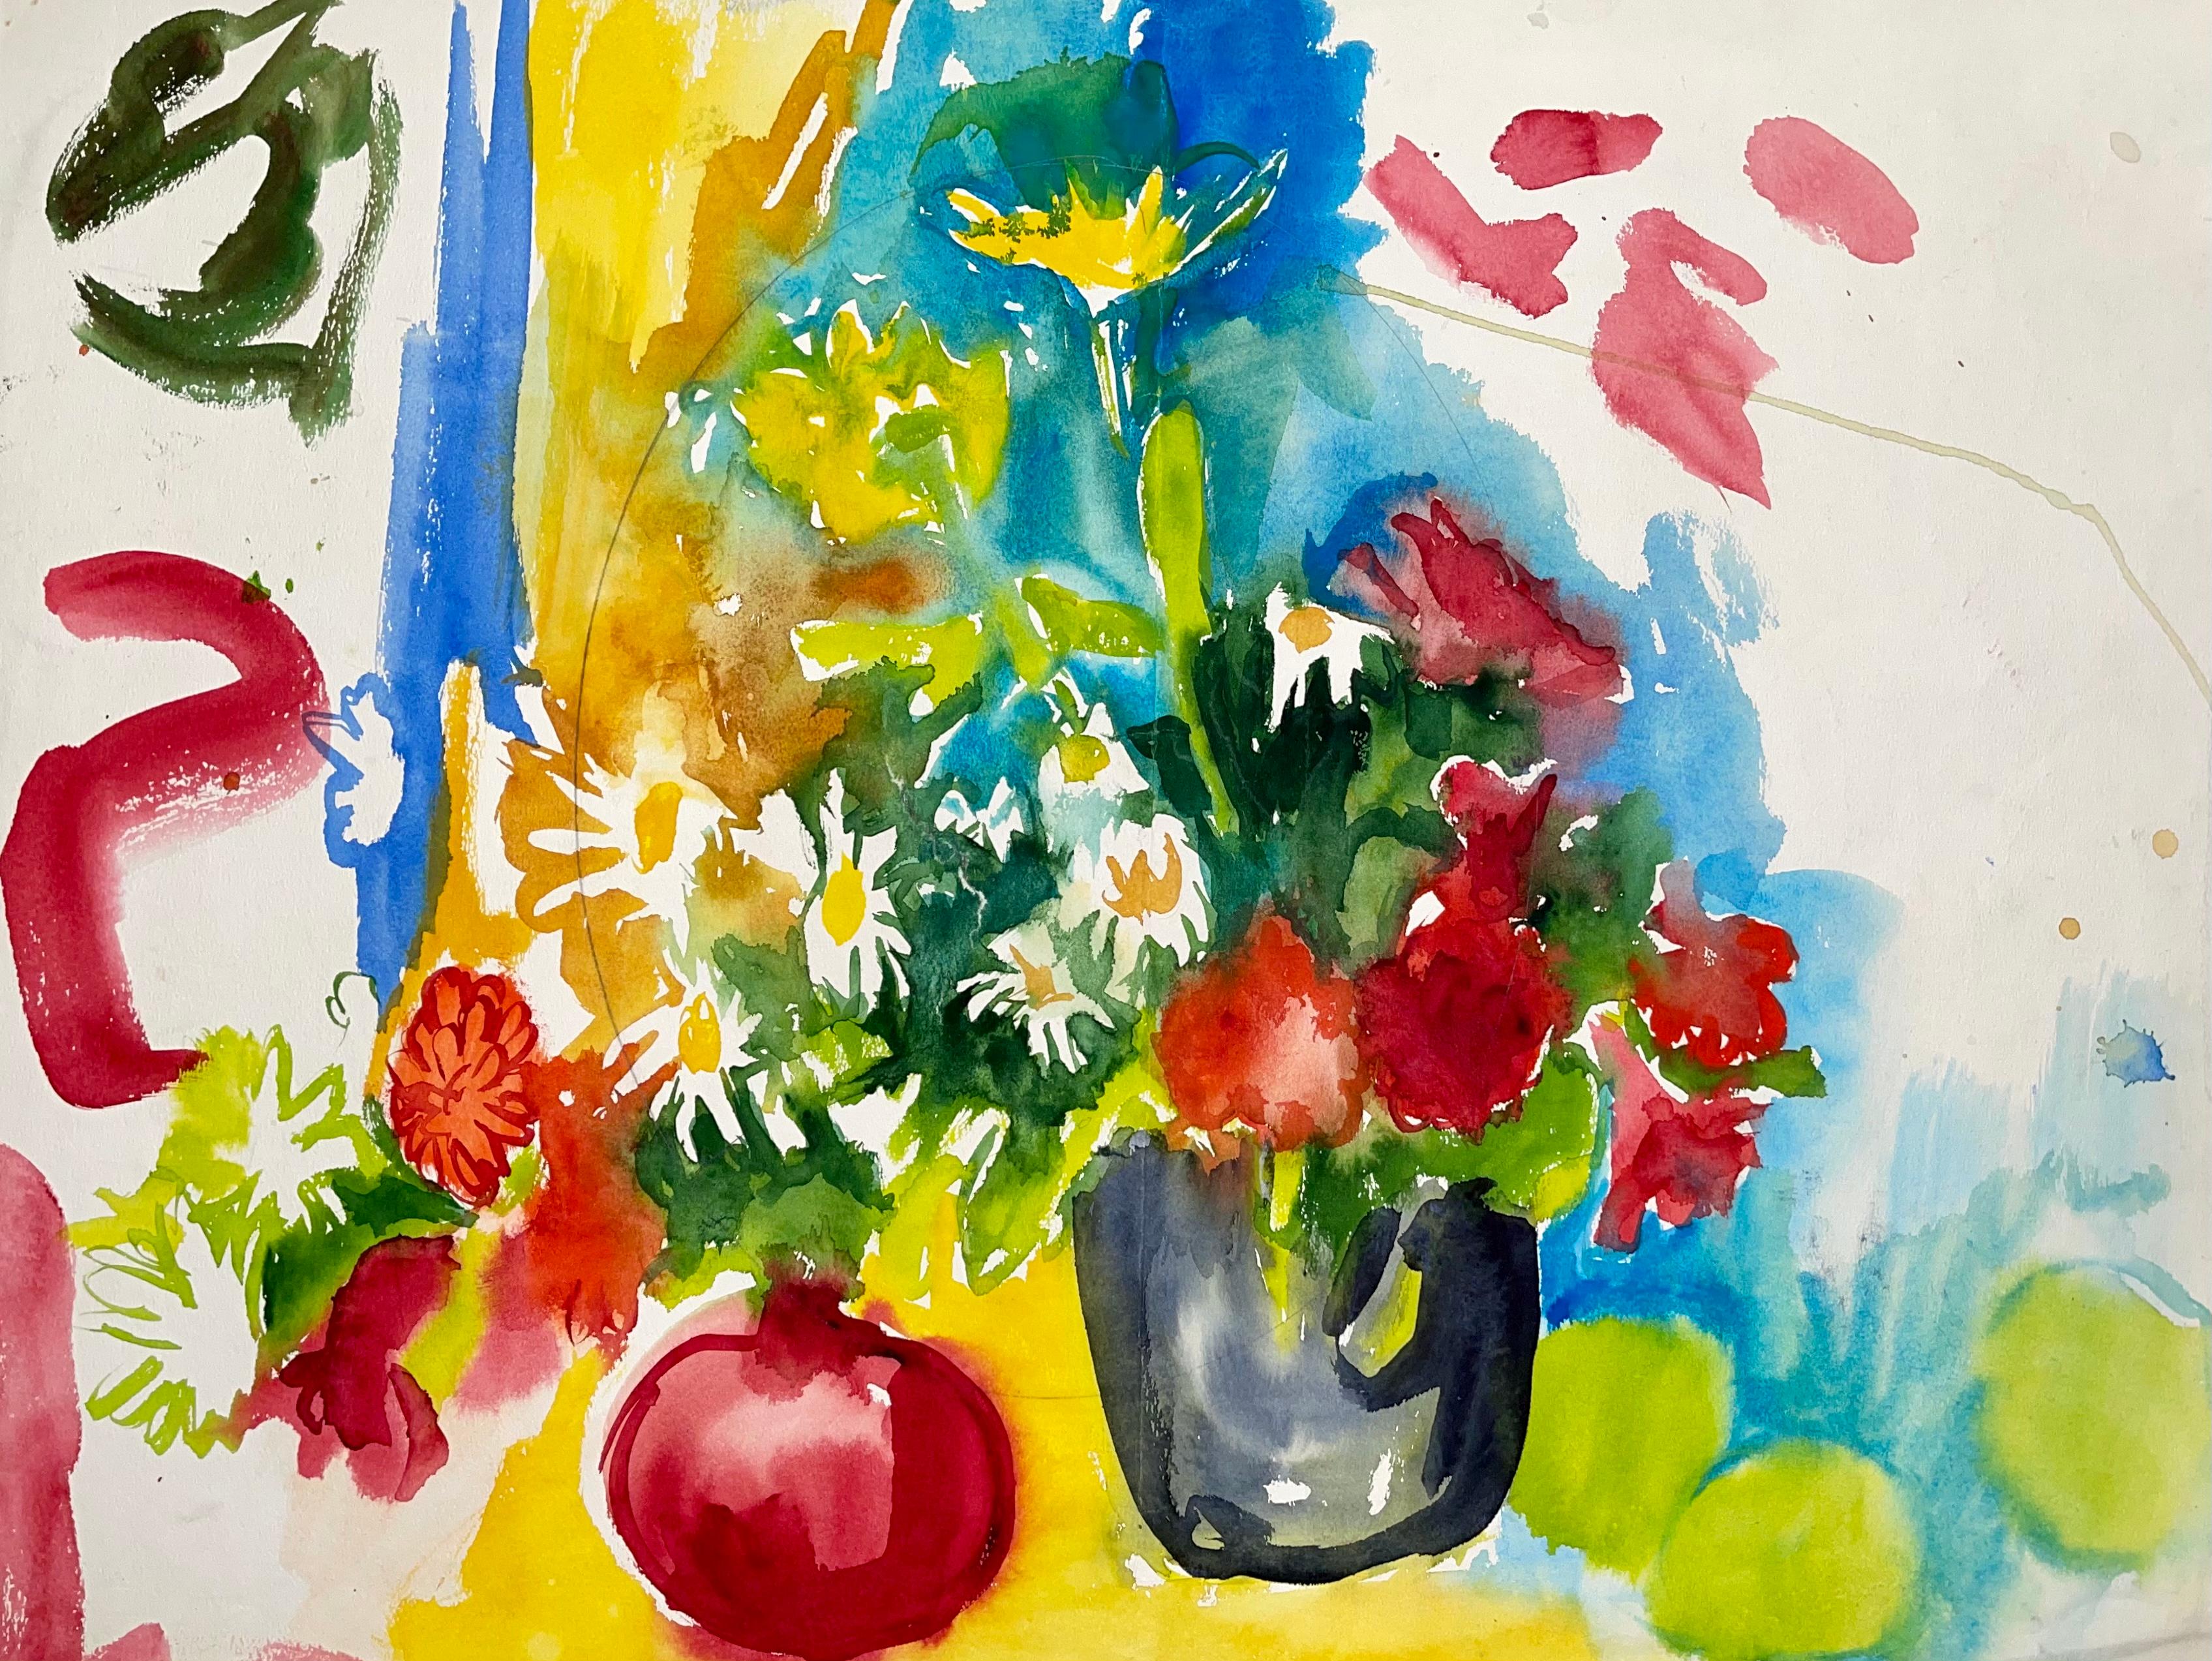 Ian Hornak Interior Painting - Untitled (Abstract Still Life with Flowers and Fruit)